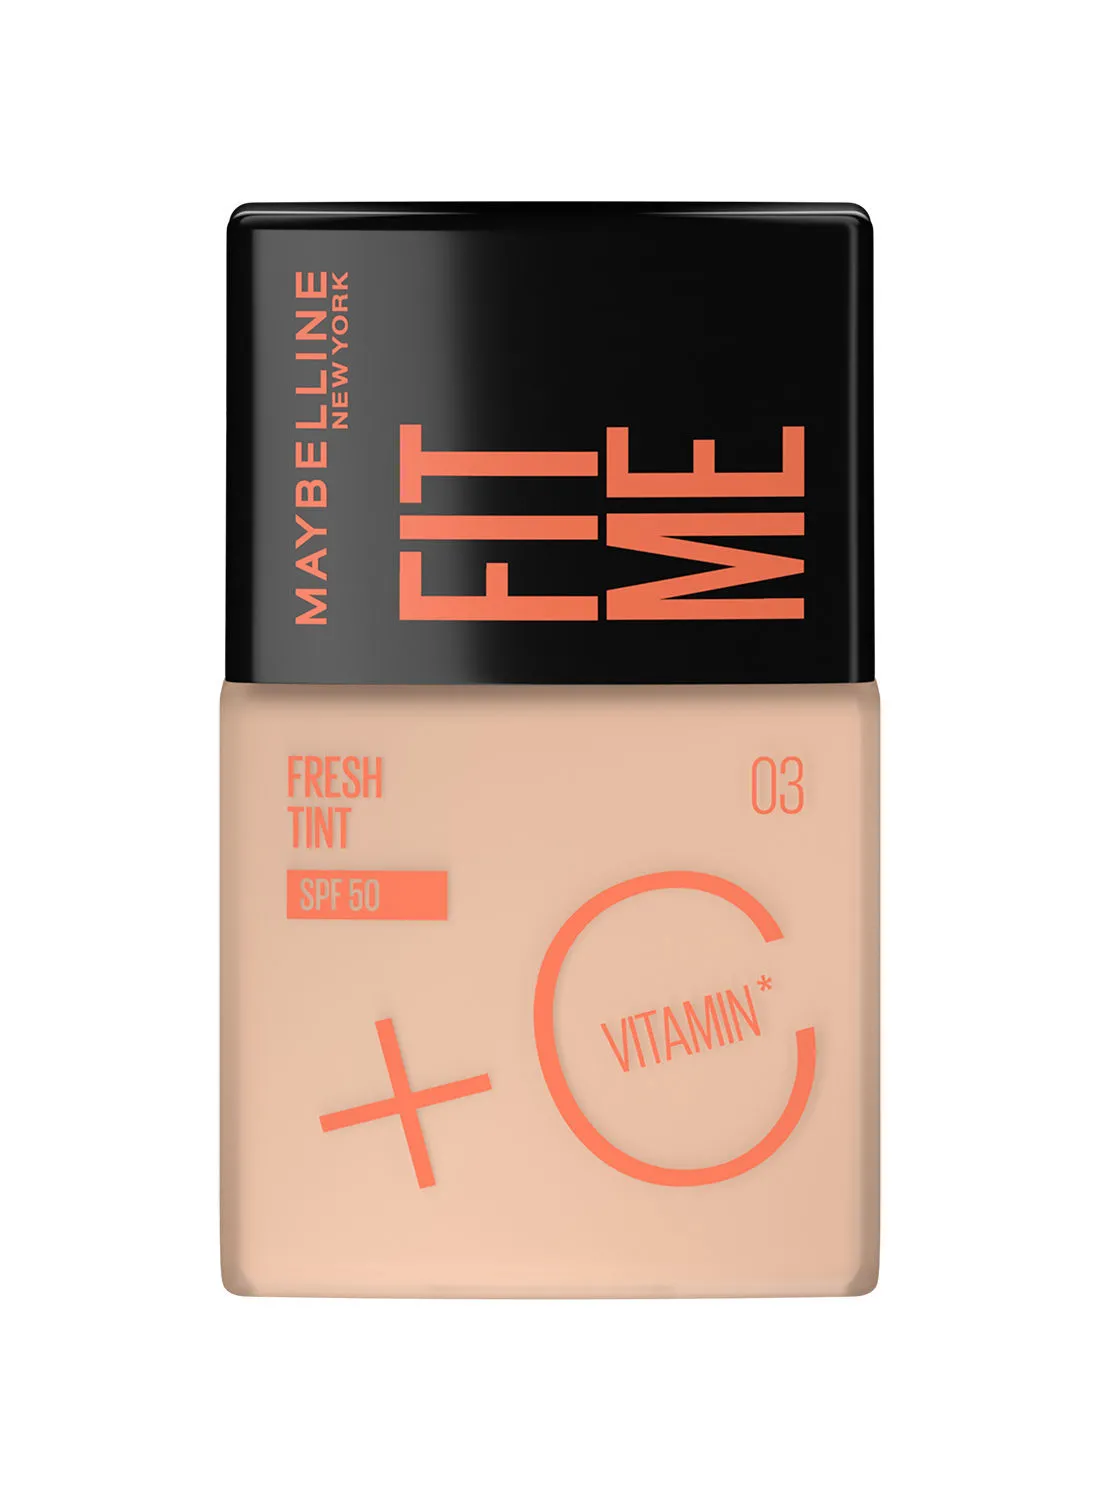 MAYBELLINE NEW YORK Maybelline New York, Fit Me Fresh Tint SPF 50 with Brightening Vitamin C, 03